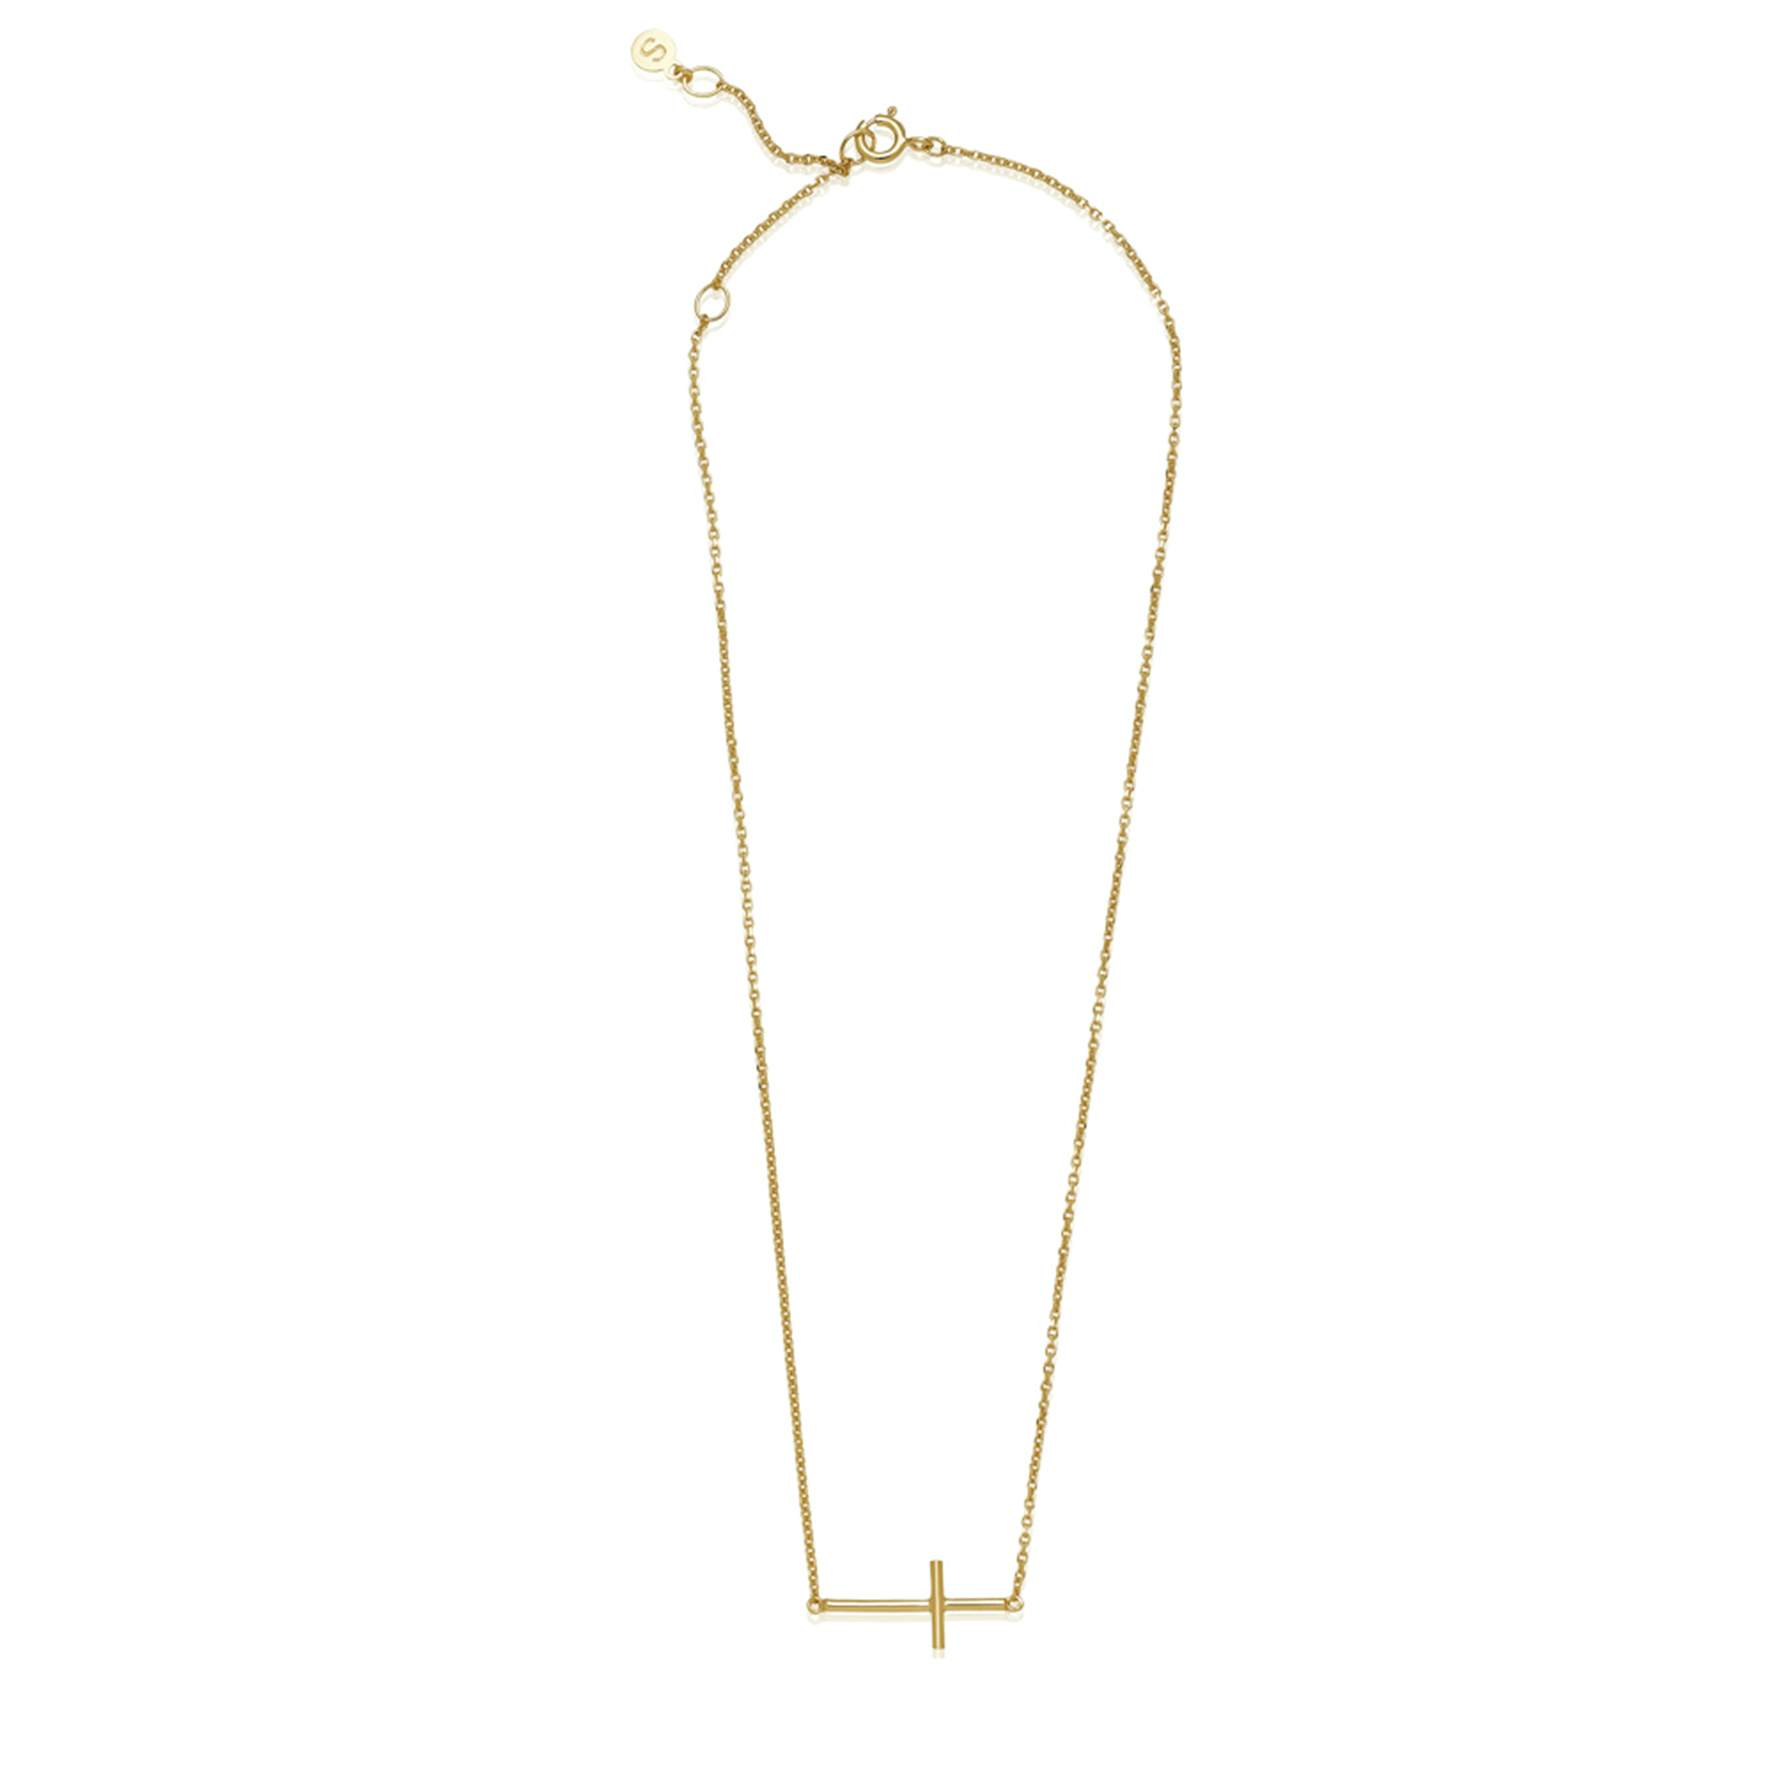 Believe Necklace from Sistie in Goldplated-Silver Sterling 925